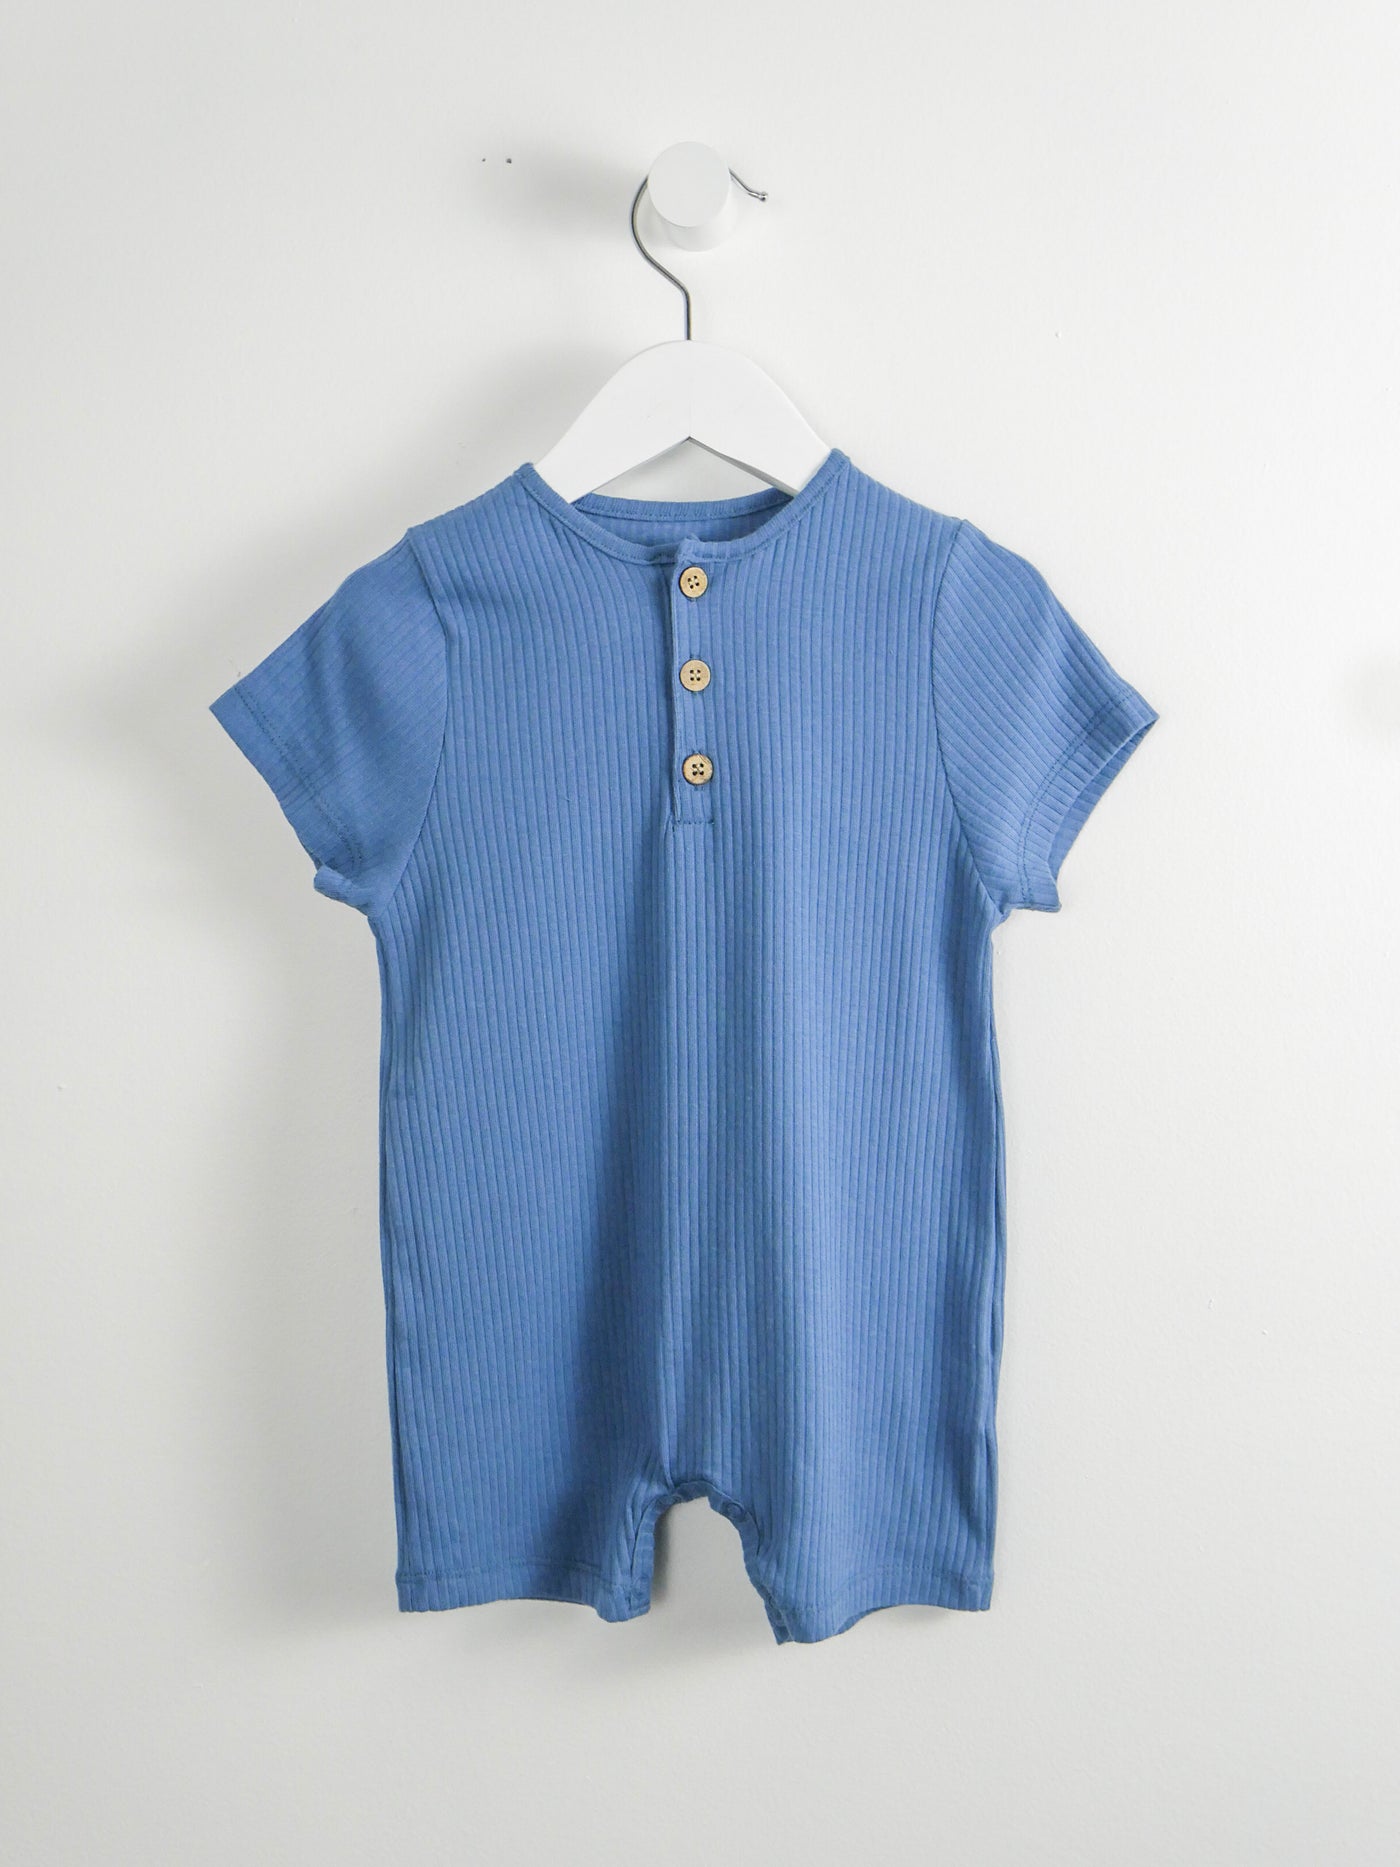 Organic cotton blue romper with snap closures around legs and 3 functional button down the front.